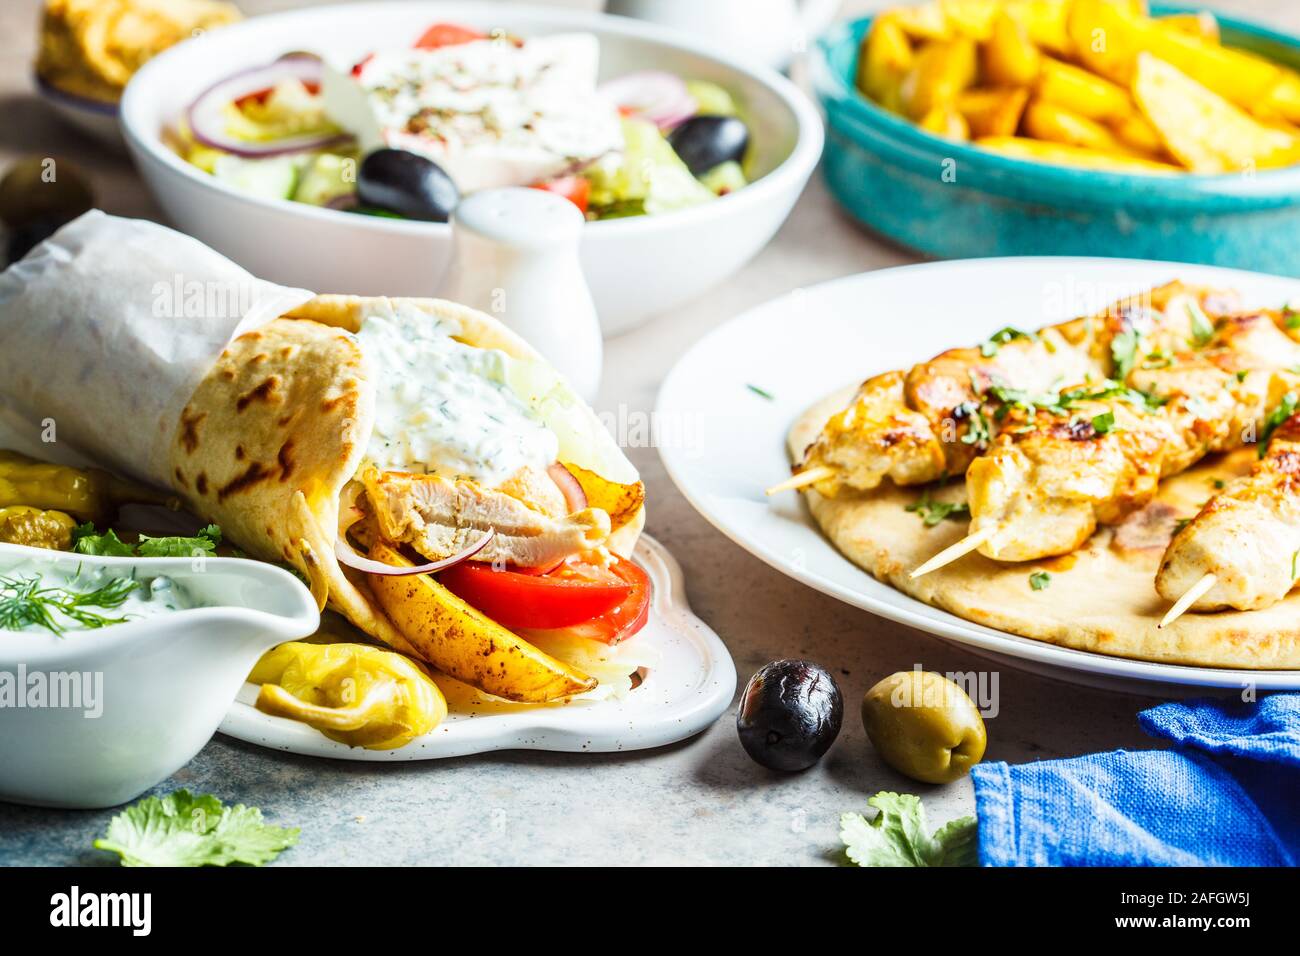 Greek food: salad, chicken souvlaki, gyros and baked potatoes on a gray background. Traditional greek cuisine concept. Stock Photo